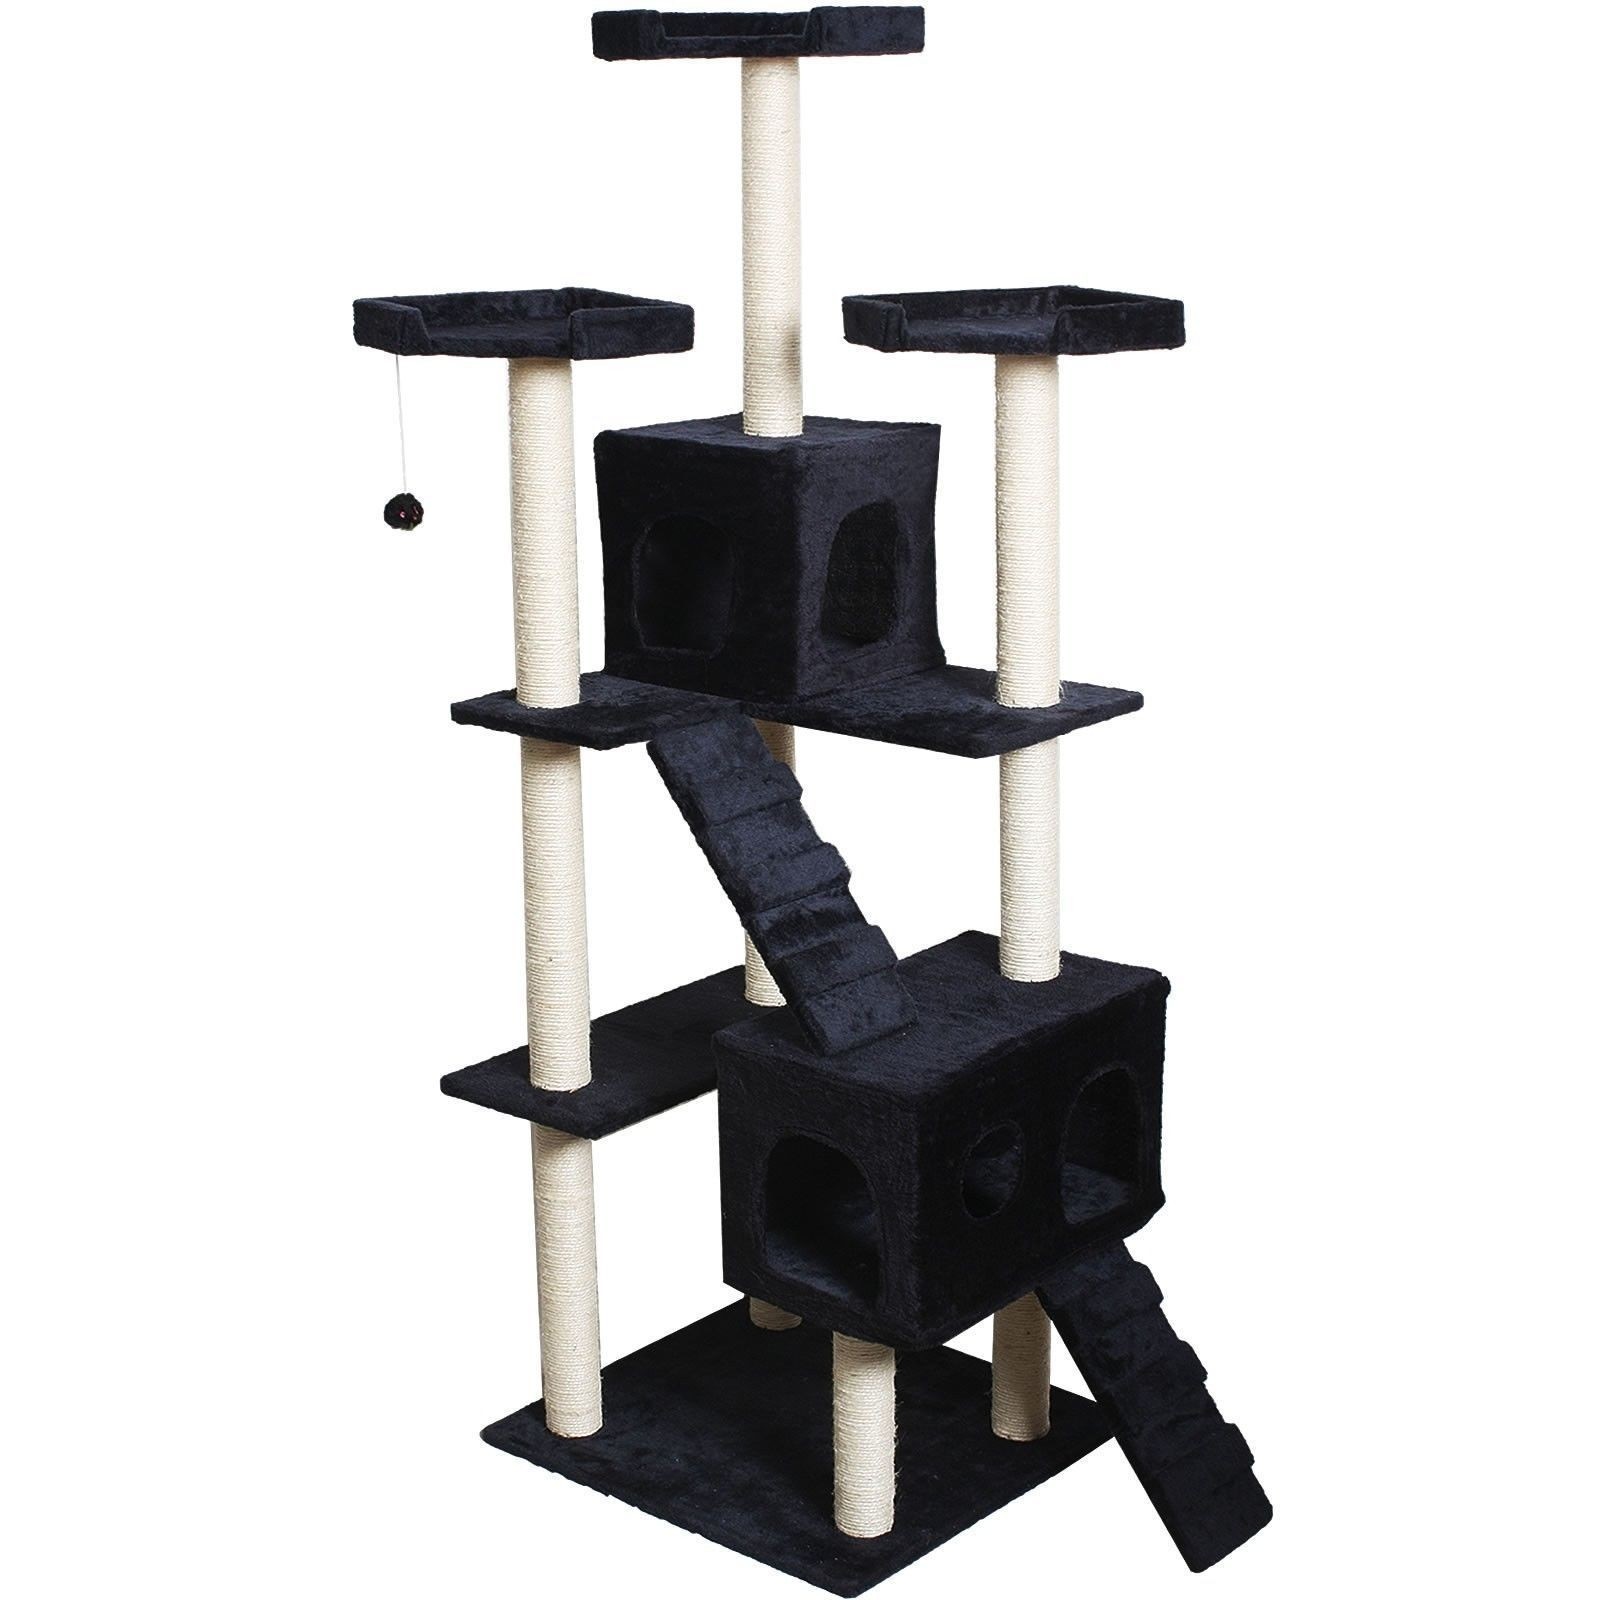 70 In. Condo Sisal-Covered Scratching Posts Cat Tree